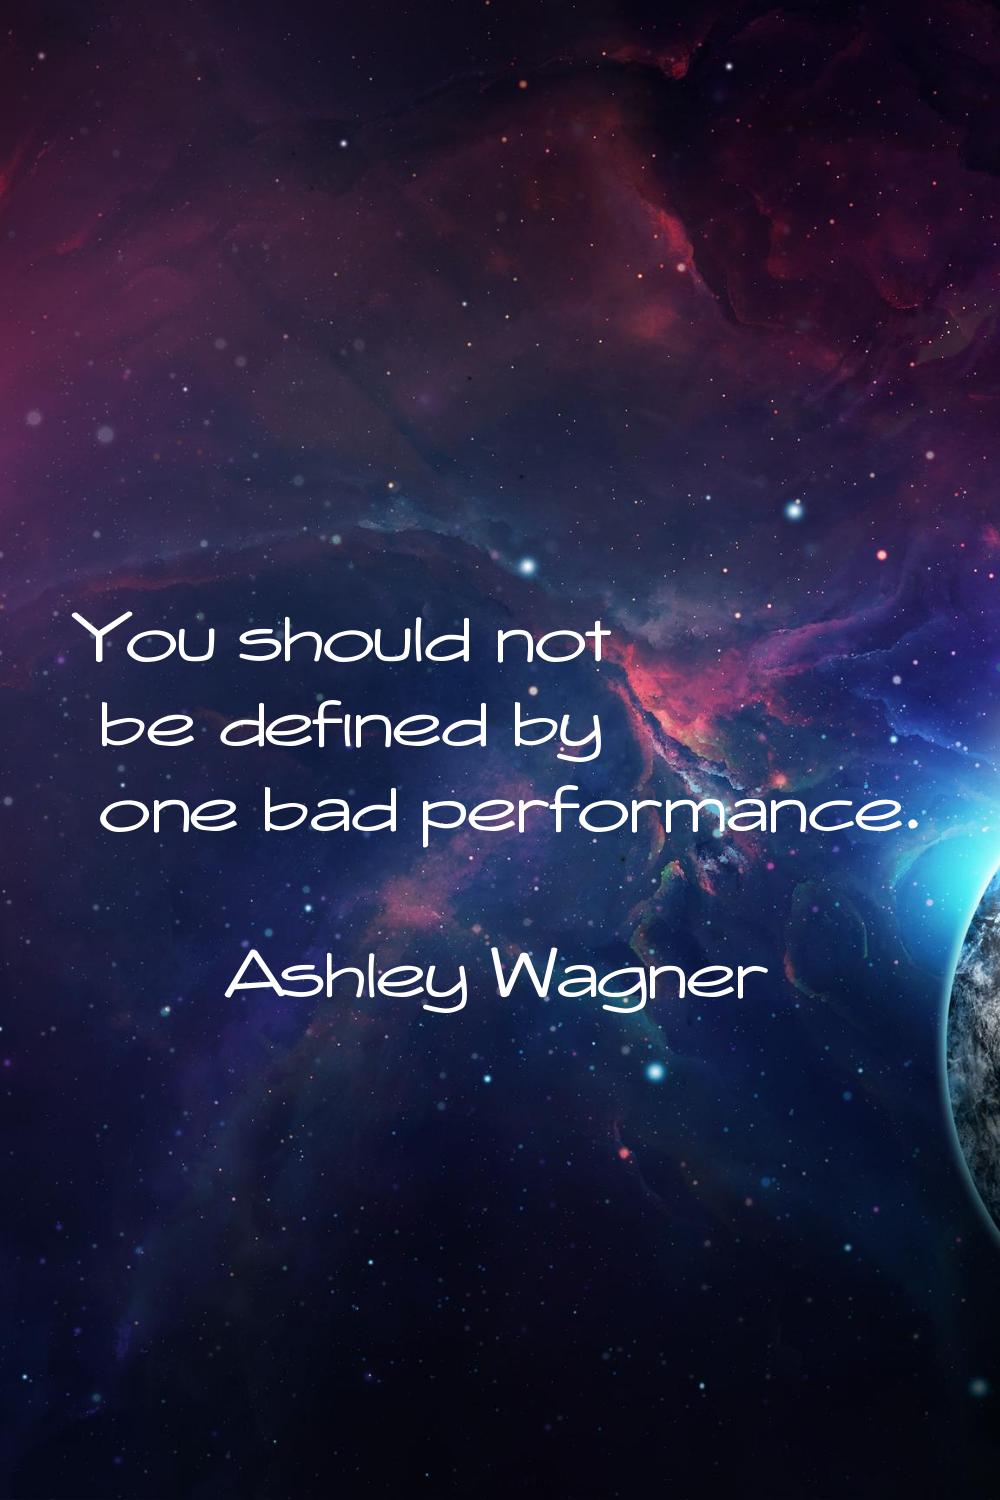 You should not be defined by one bad performance.